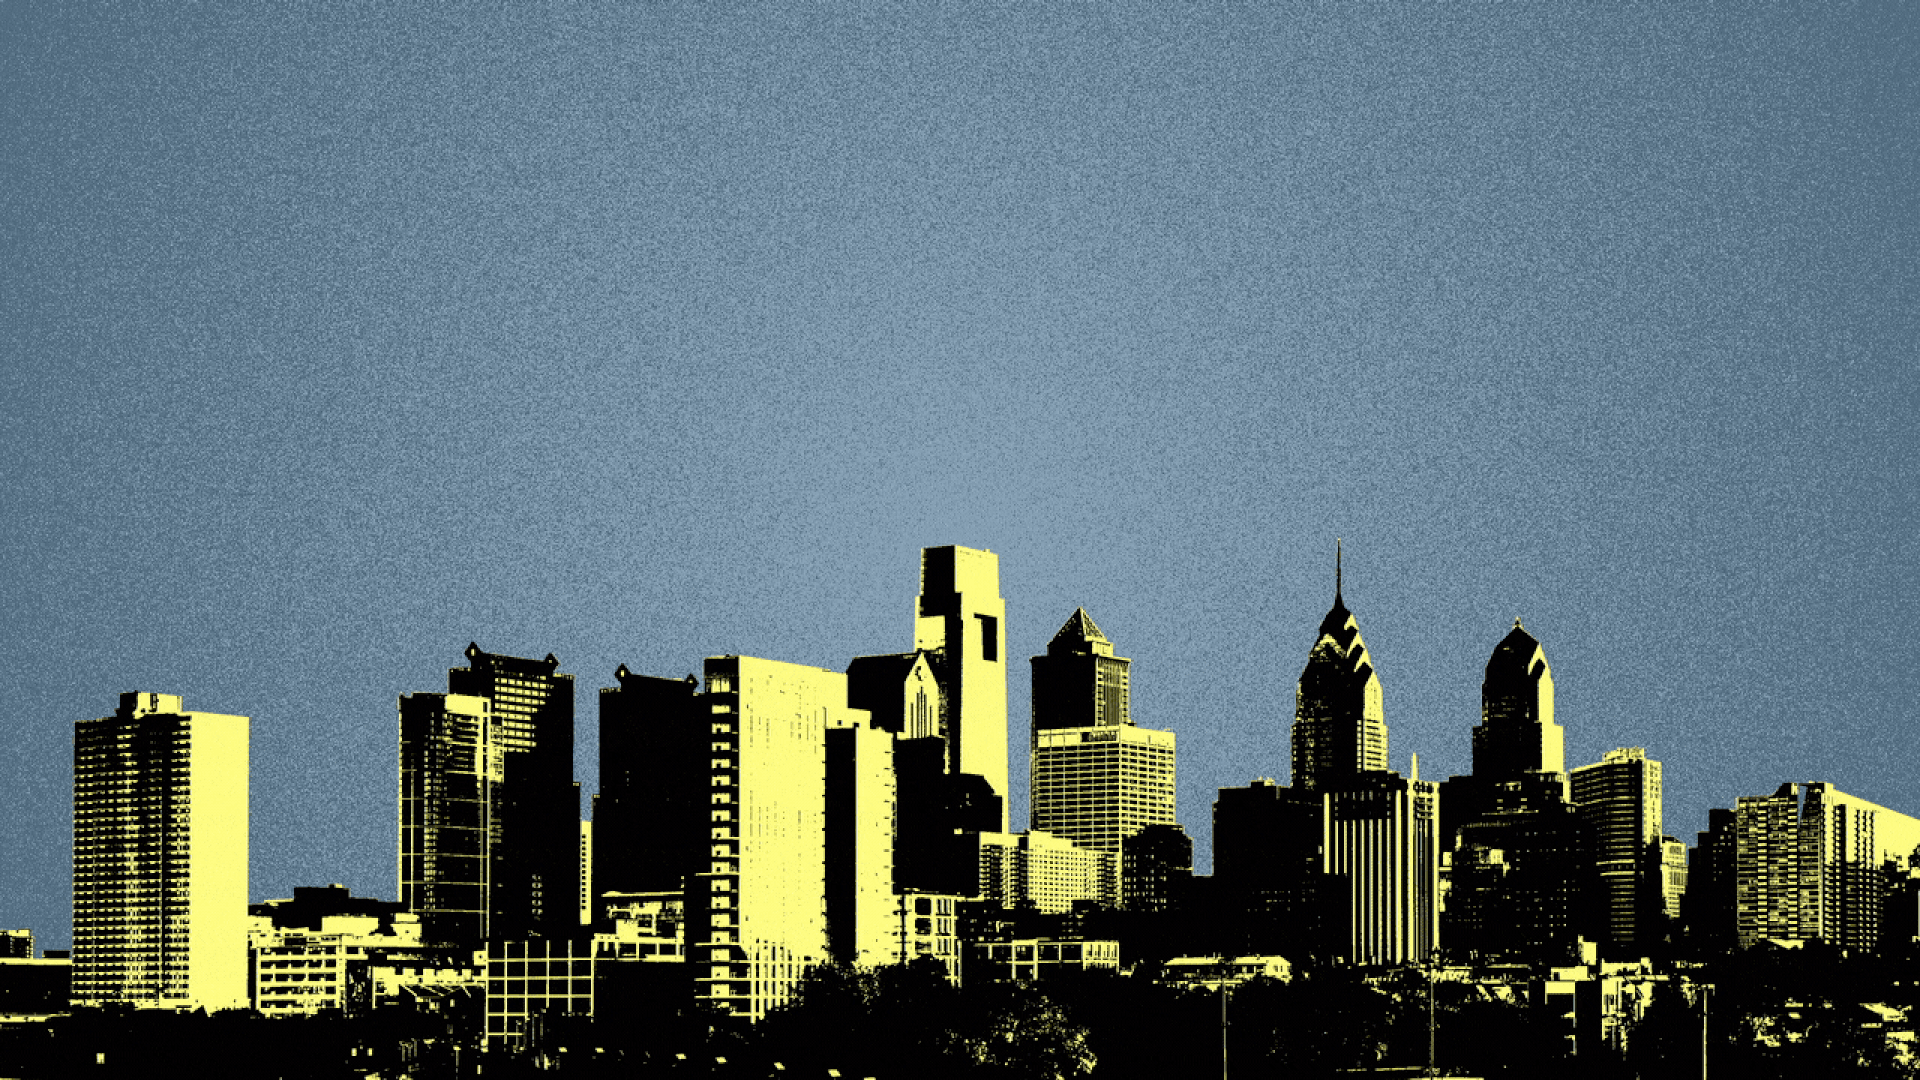 Illustration of the Philadelphia skyline with word balloons filled with exclamation points popping up over it.